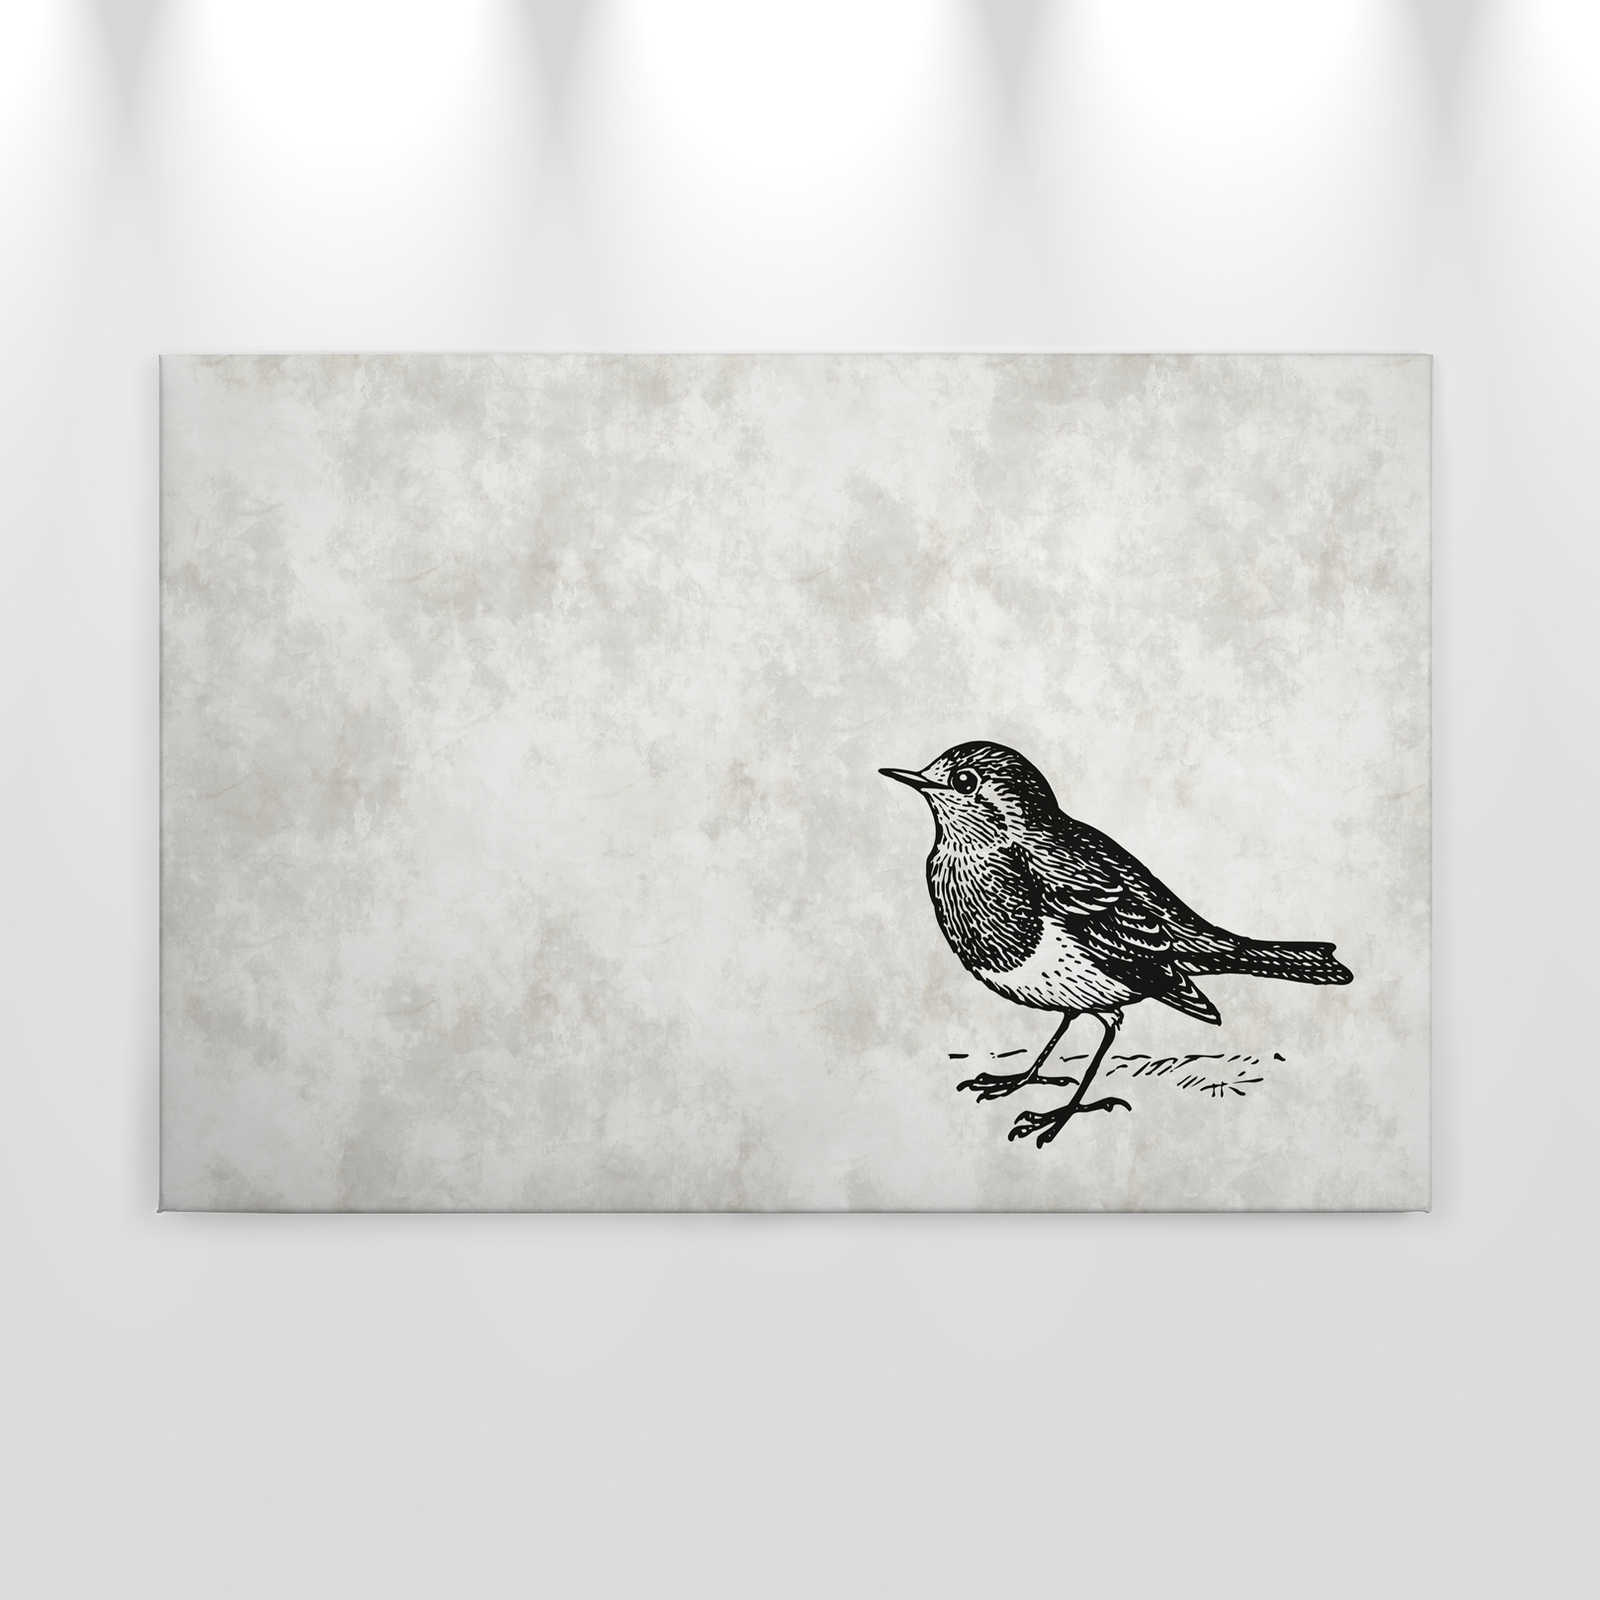             Black and White Canvas Painting with Bird - 0.90 m x 0.60 m
        